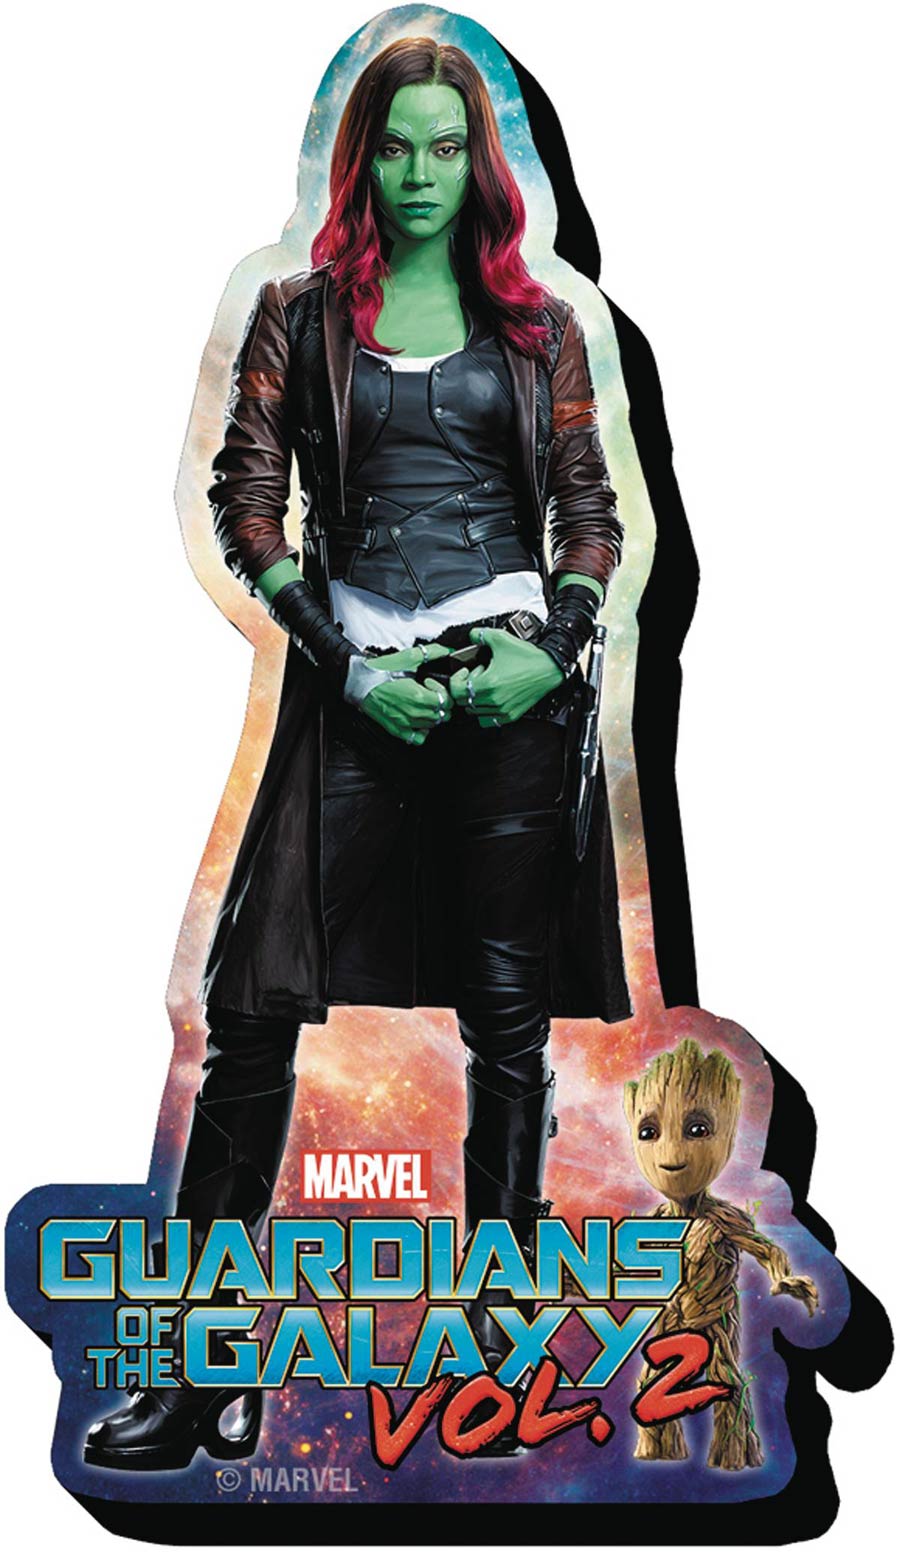 Guardians Of The Galaxy Vol 2 Chunky Magnet - Gamora